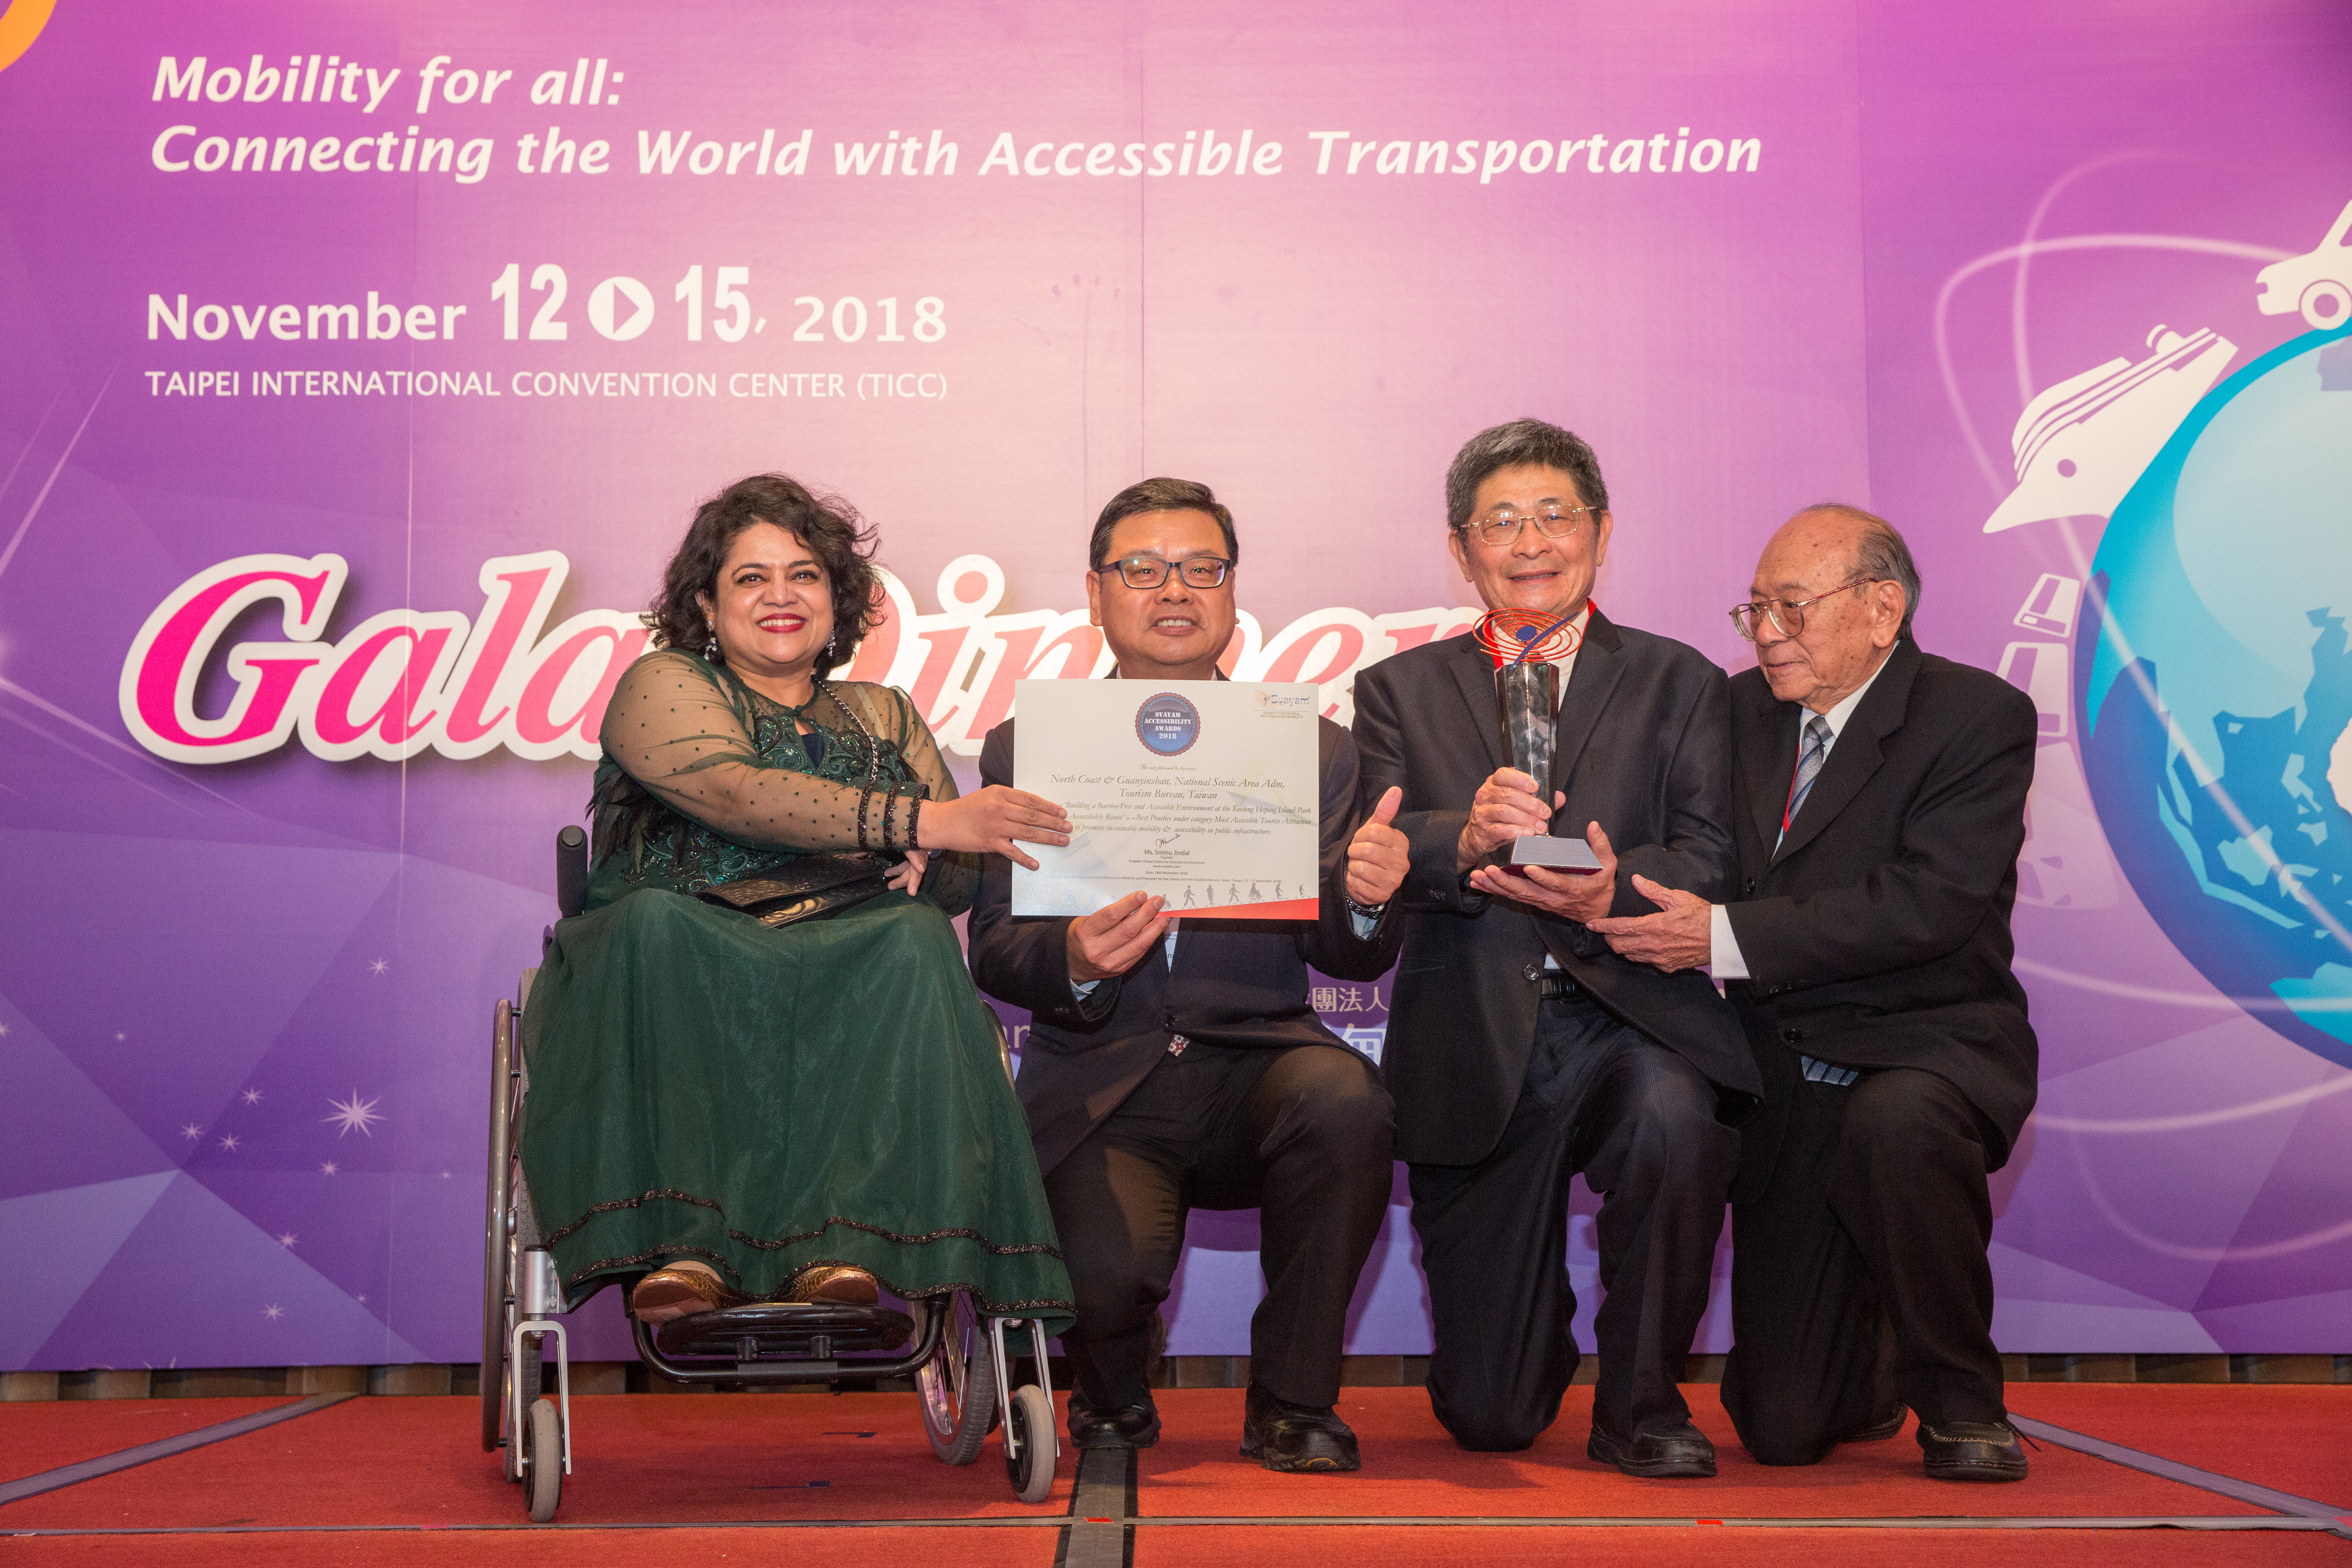 Photo of Mr. Shi-Ching, Chang, Dy Director General, Tourism Bureau MOTC Taiwan and Mr. Jenn-Chyan Chang, Director of North Coast & Guanyinshan National Scenic Area Administration, Tourism Bureau, MOTC, Taiwan, receiving Svayam Accessibility Award 2018 from Svayam Founder Ms.Sminu Jindal & Mr. Patrick Yey, Hony. Chairman, TRANSED2018, at Taipei on 14 Nov 2018 on the sidelines of 15th International Conference on Mobility and Transport for Elderly and Disabled Persons (TRANSED2018)